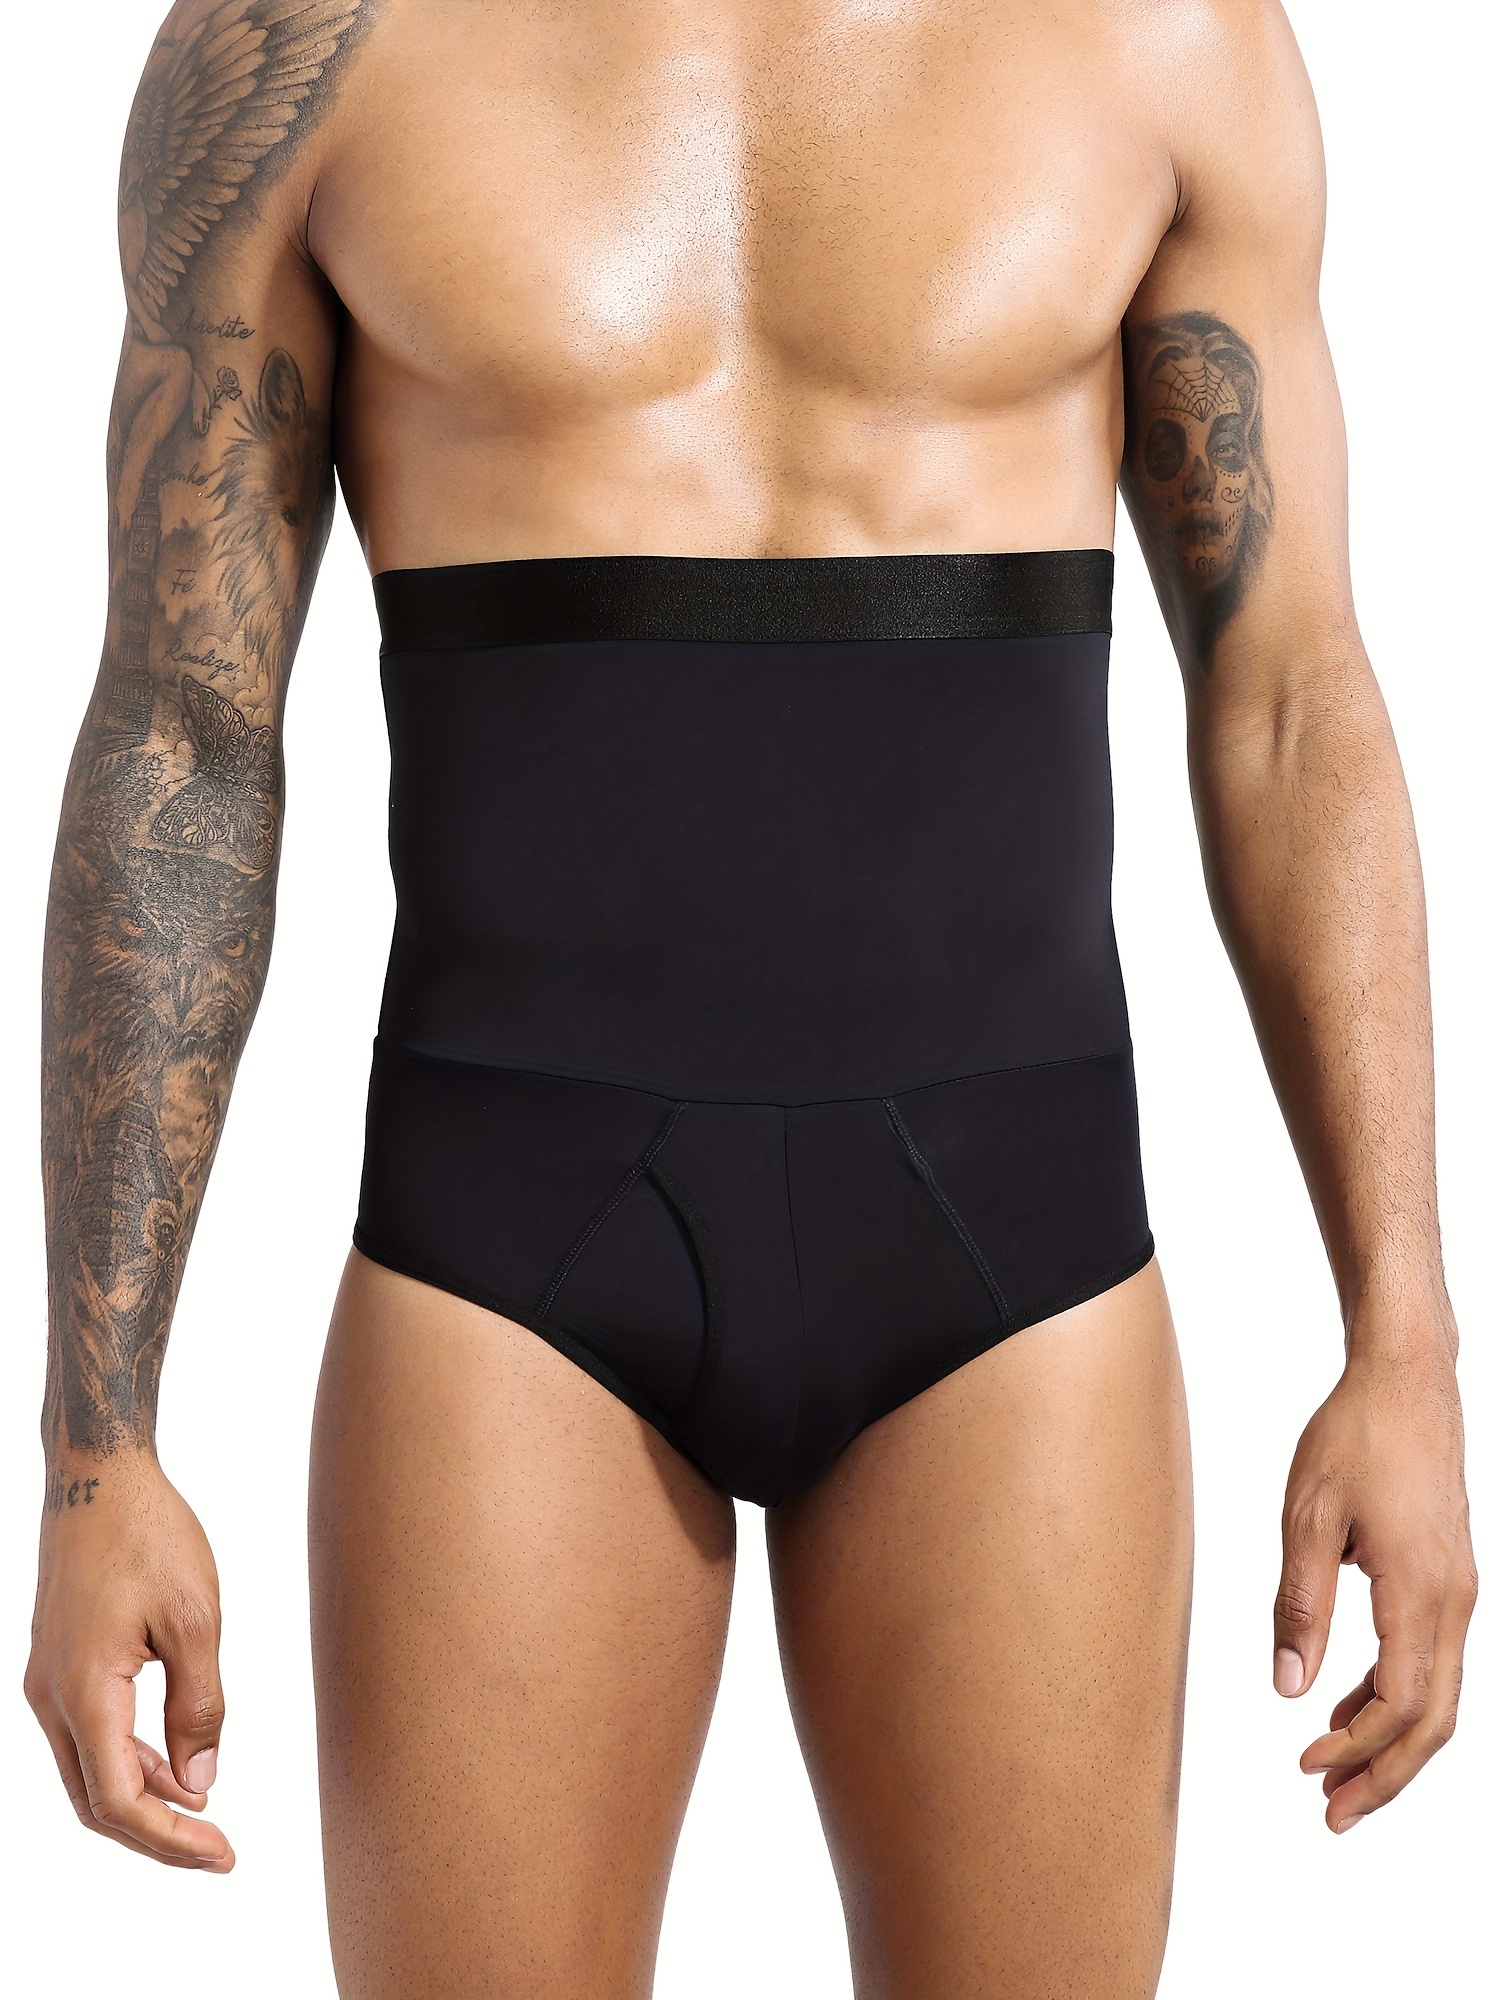 Saree Shapewear - Seamless mens tummy tucker brief Only wholesale Whtsapp  wa.link/yqkd0m #tummytucker #brief #mensbrief #mentummytucker  #menstummytuckerbrief #manufacturer #exporter #Piatrends #b2bsales  #b2bmarketing #B2Becommerce